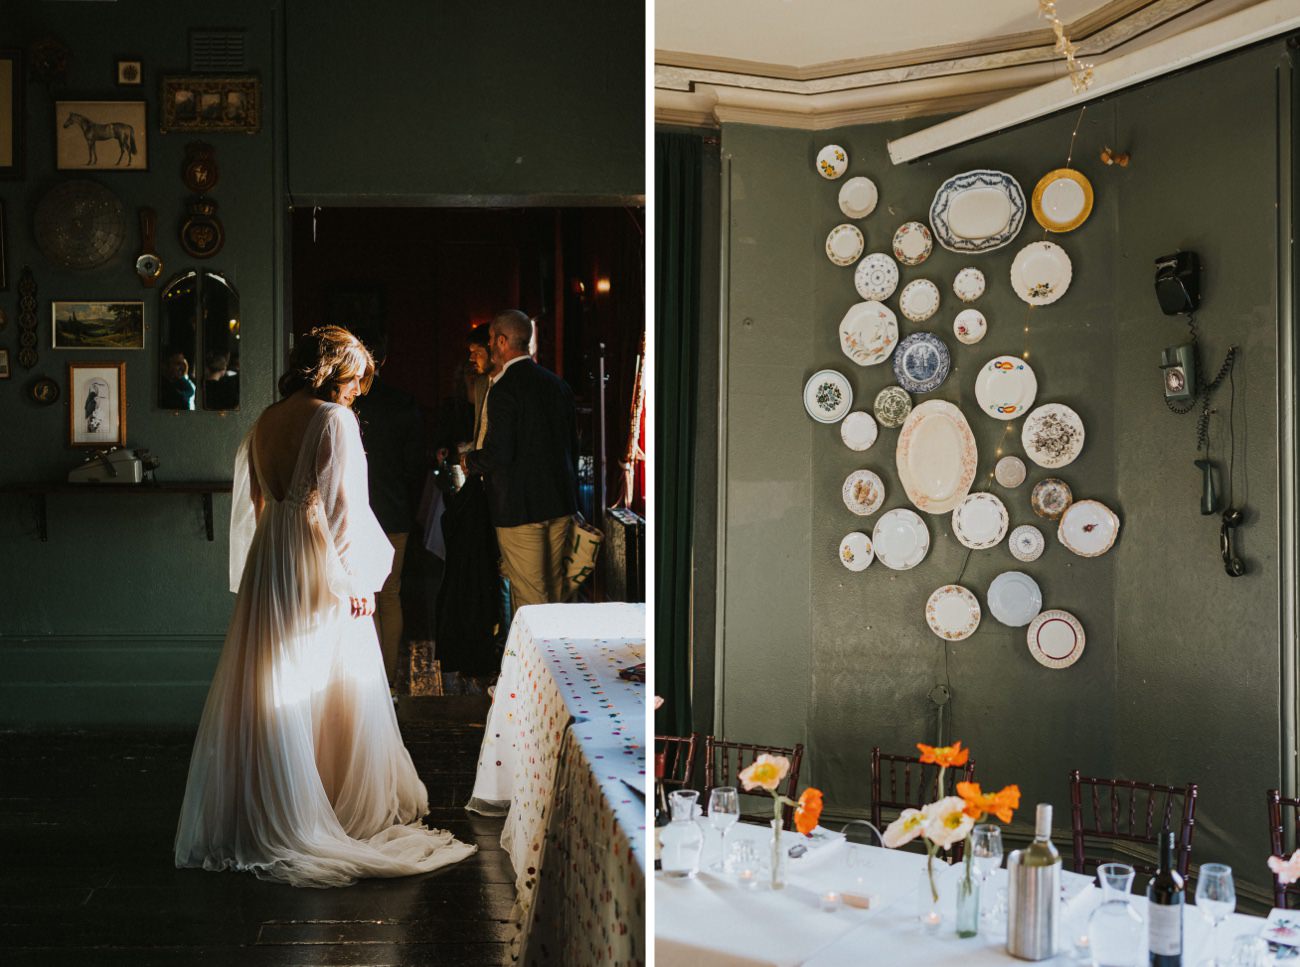 Plates adorn wall at East Dulwich Tavern, Bride stands in sunlight